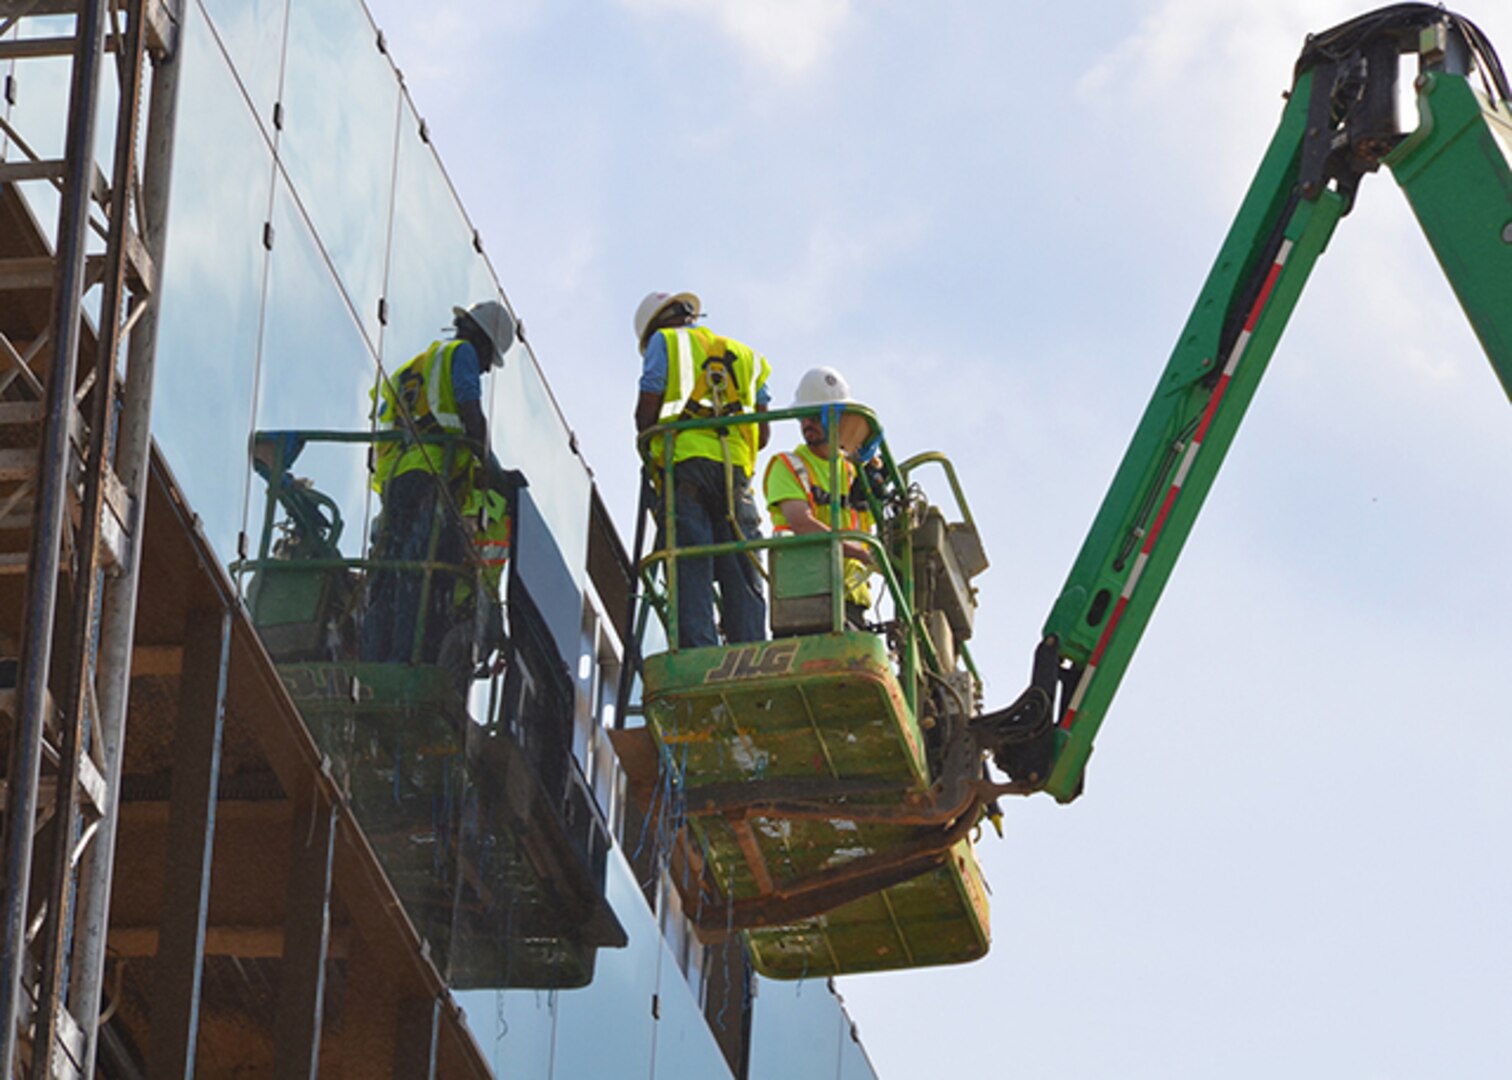 Construction workers install glass as part of a curtain wall system to the front of the new DLA Aviation Operations Center April 12, 2017.  The curtain wall system is a non-structural covering on the building to keep weather out and occupants in.  The wall made of lightweight material reduces construction costs and allows natural light to penetrate deeper within the building.